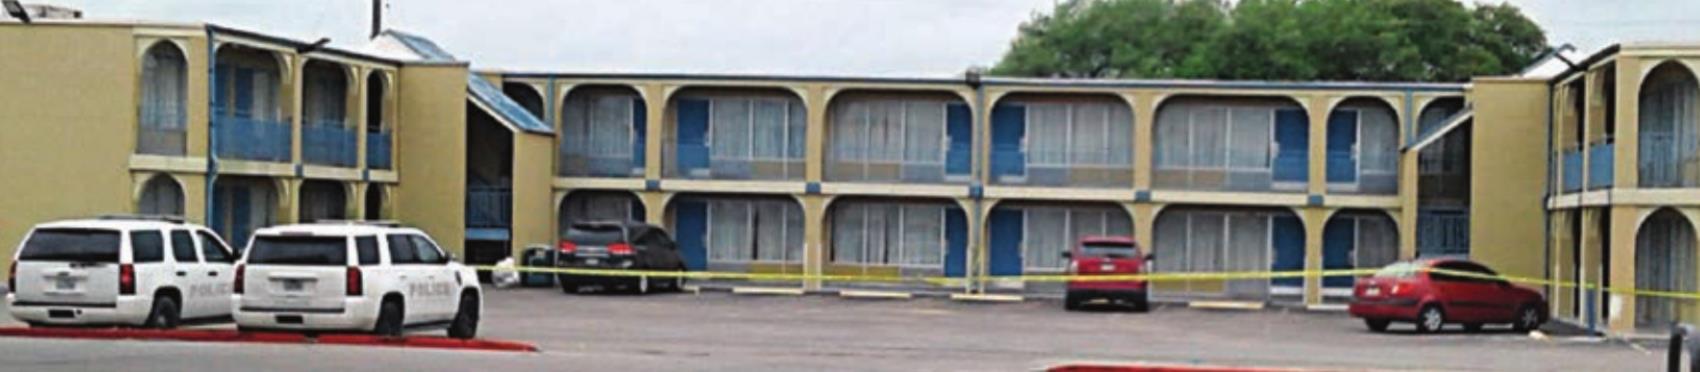 FROM THE APRIL 9 ISSUE – A cluster of COVID-19 cases were traced to a local motel, resulting in the Schulenburg Police Department watching the business to make sure none of the quarantined occupants attempted to leave. Sticker File Photo